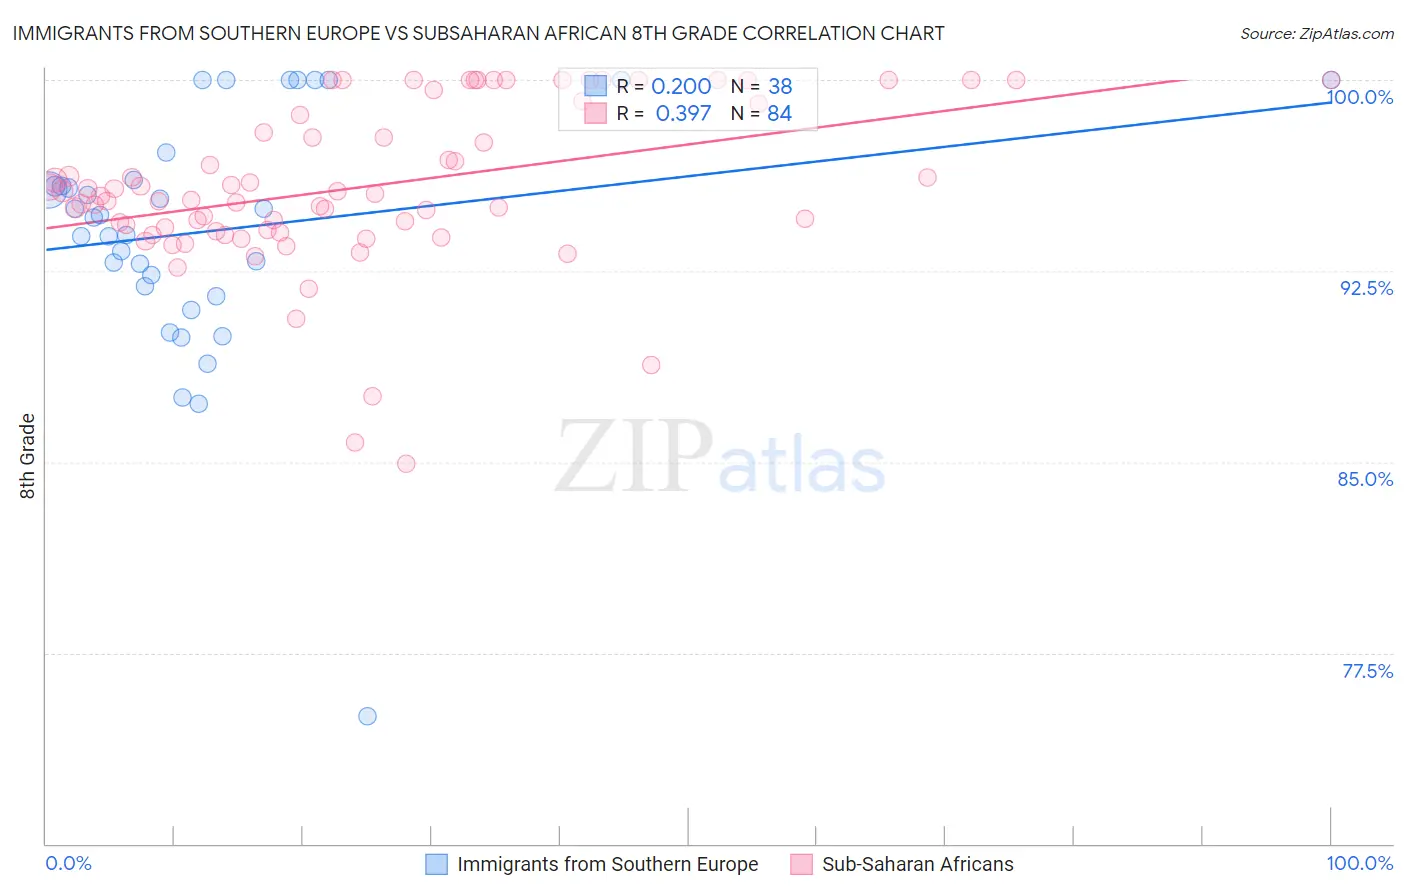 Immigrants from Southern Europe vs Subsaharan African 8th Grade